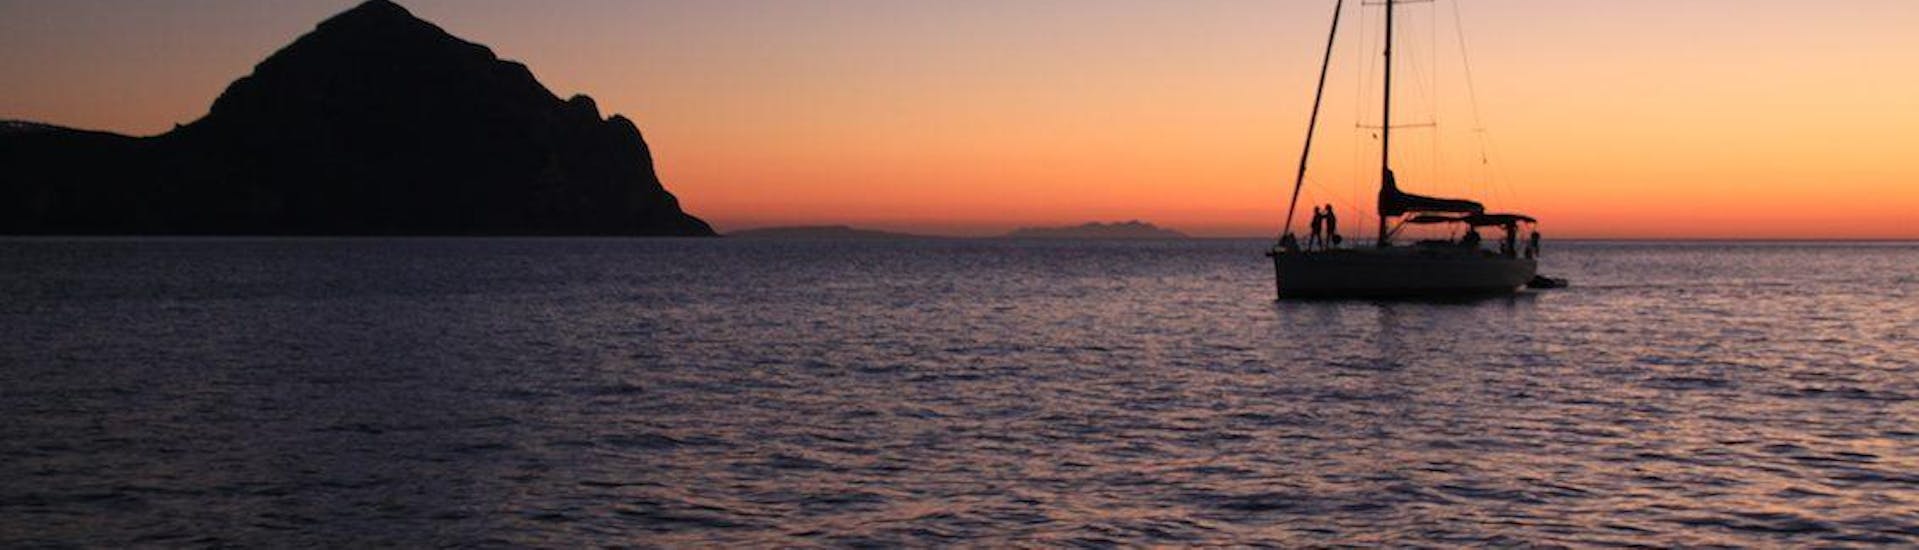 private-sunset-boat-trip-along-the-coast-of-sorrento-you-know-boat